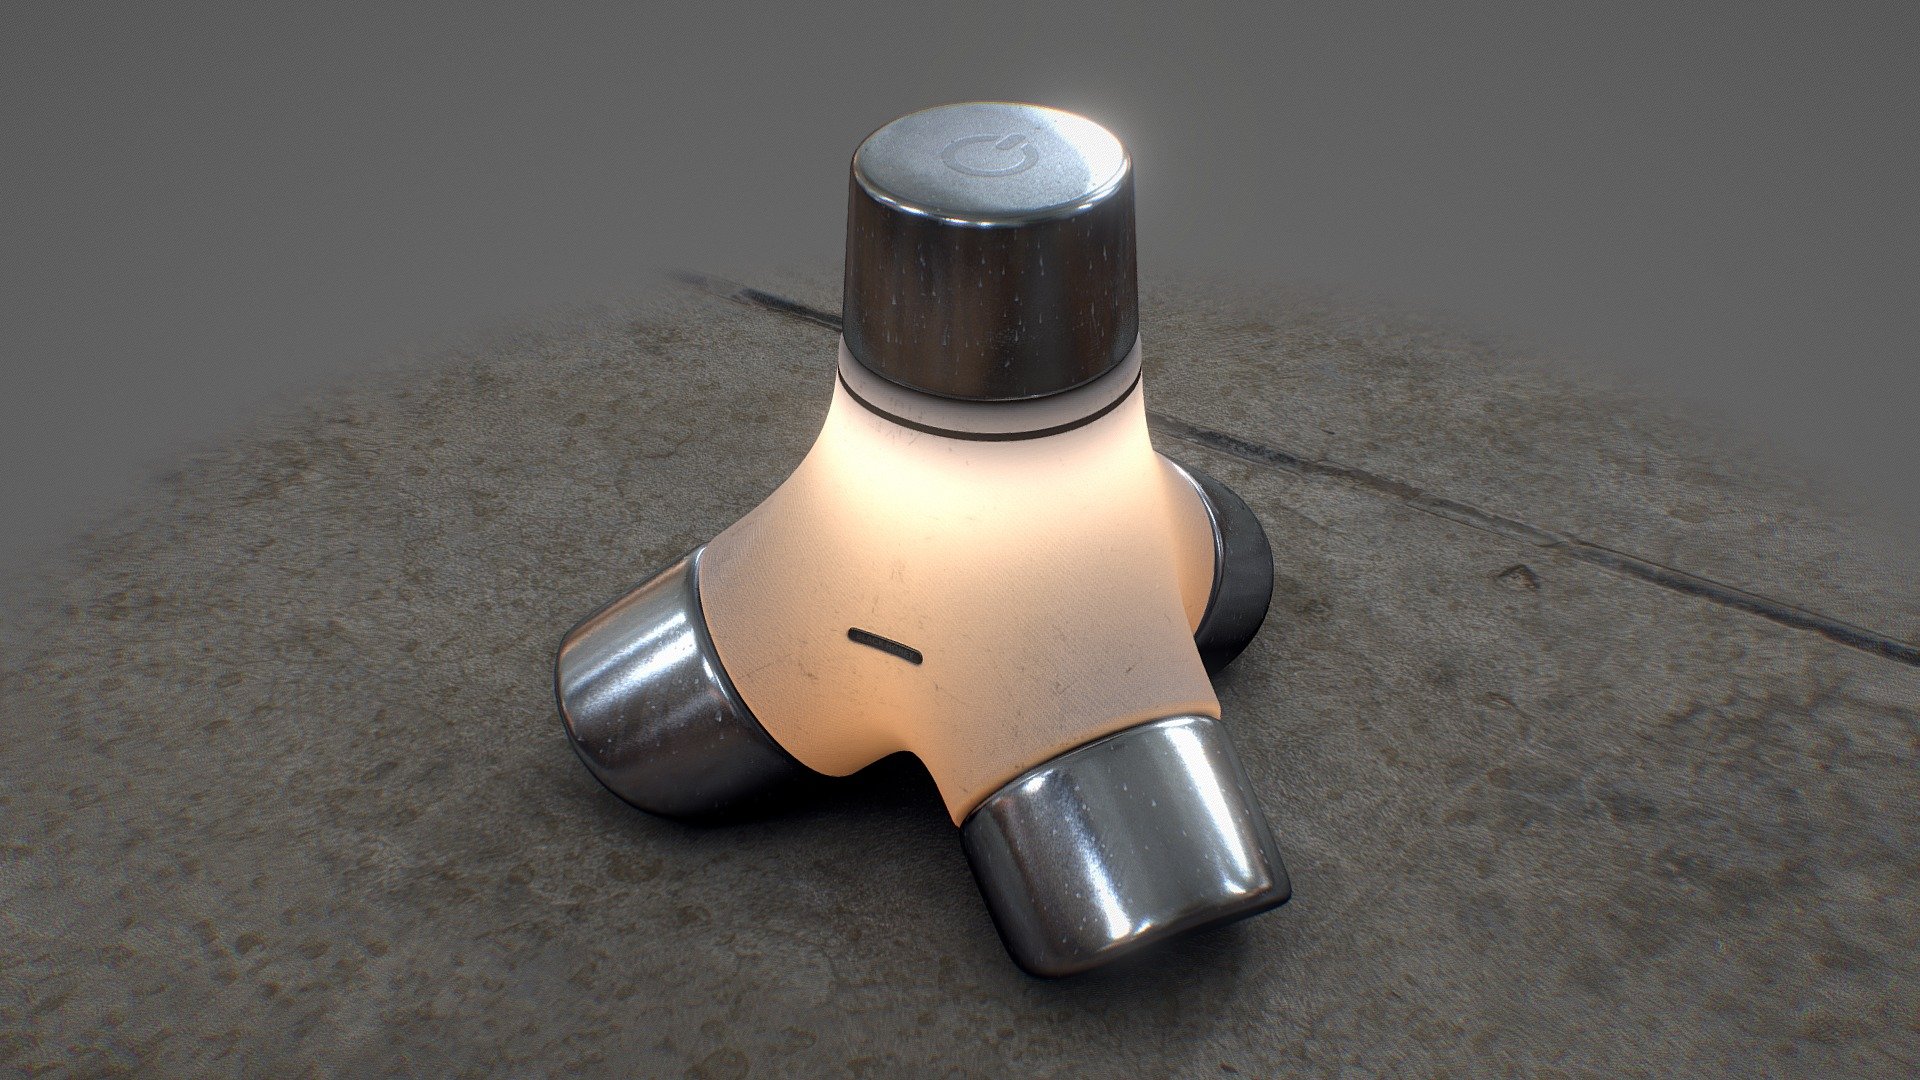 More Lamps:

SciFi-ish Brutalism Series - Floor Lamp
https://sketchfab.com/3d-models/scifi-ish-brutalism-series-floor-lamp-56308881a6684d61bd37fd7d1c5c5efd

Modern Lamp 1: https://sketchfab.com/3d-models/modern-wooden-floor-lamp-73a5a0b775bb44dda149cb4a9981761f

Modern Lamp 2: https://sketchfab.com/3d-models/modern-lamp-ebc591fb9d2c4af5862fcdc8c4ba0401

Drag and Drop and you are good to go. 4k Textures. It is possible to change the image by editing the emissive map. It is a very simple process.

Check my profile for free models https://sketchfab.com/re1monsen If you enjoy my work please consider supporting me I have many affordable models in the shop. Smash that follow!

Feel free to contact me. I’d love yo hear from you.

Thanks! - SciFi-ish Series - Lamp - Buy Royalty Free 3D model by re1monsen 3d model